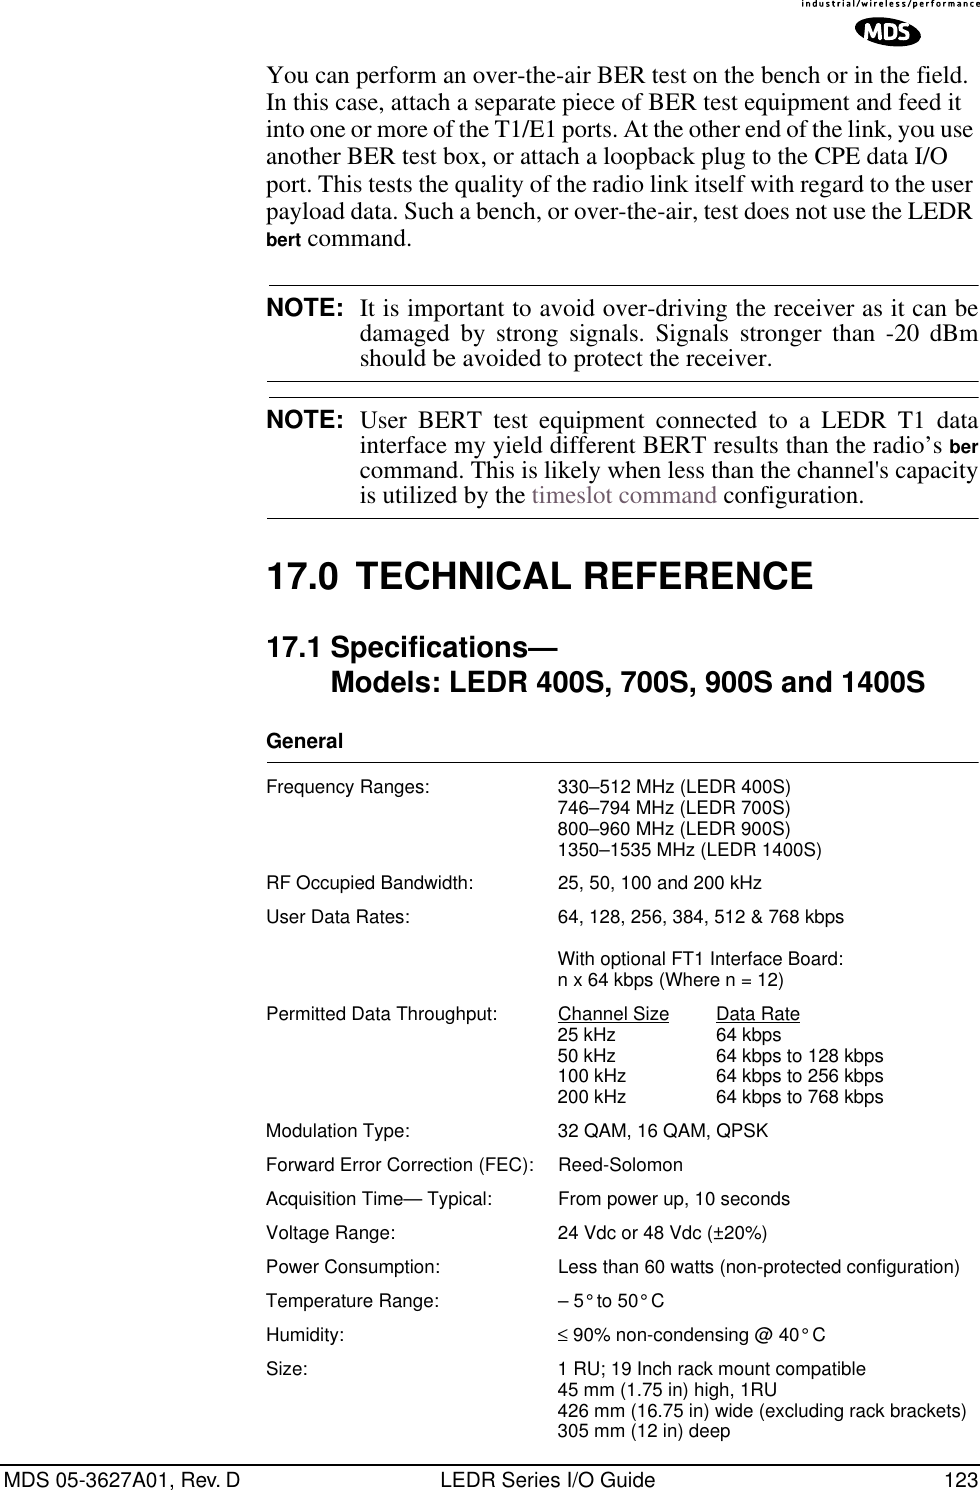 MDS 05-3627A01, Rev. D LEDR Series I/O Guide 123You can perform an over-the-air BER test on the bench or in the field. In this case, attach a separate piece of BER test equipment and feed it into one or more of the T1/E1 ports. At the other end of the link, you use another BER test box, or attach a loopback plug to the CPE data I/O port. This tests the quality of the radio link itself with regard to the user payload data. Such a bench, or over-the-air, test does not use the LEDR bert command.NOTE: It is important to avoid over-driving the receiver as it can bedamaged by strong signals. Signals stronger than -20 dBmshould be avoided to protect the receiver.NOTE: User BERT test equipment connected to a LEDR T1 datainterface my yield different BERT results than the radio’s bercommand. This is likely when less than the channel&apos;s capacityis utilized by the timeslot command configuration.17.0 TECHNICAL REFERENCE17.1 Specifications—Models: LEDR 400S, 700S, 900S and 1400SGeneral Frequency Ranges: 330–512 MHz (LEDR 400S)746–794 MHz (LEDR 700S)800–960 MHz (LEDR 900S)1350–1535 MHz (LEDR 1400S)RF Occupied Bandwidth: 25, 50, 100 and 200 kHzUser Data Rates: 64, 128, 256, 384, 512 &amp; 768 kbpsWith optional FT1 Interface Board: n x 64 kbps (Where n = 12)Permitted Data Throughput: Channel Size Data Rate25 kHz 64 kbps50 kHz 64 kbps to 128 kbps100 kHz 64 kbps to 256 kbps200 kHz 64 kbps to 768 kbpsModulation Type: 32 QAM, 16 QAM, QPSKForward Error Correction (FEC): Reed-SolomonAcquisition Time— Typical: From power up, 10 secondsVoltage Range: 24 Vdc or 48 Vdc (±20%)Power Consumption: Less than 60 watts (non-protected configuration)Temperature Range: – 5° to 50° CHumidity: ≤ 90% non-condensing @ 40° CSize: 1 RU; 19 Inch rack mount compatible45 mm (1.75 in) high, 1RU426 mm (16.75 in) wide (excluding rack brackets)305 mm (12 in) deep